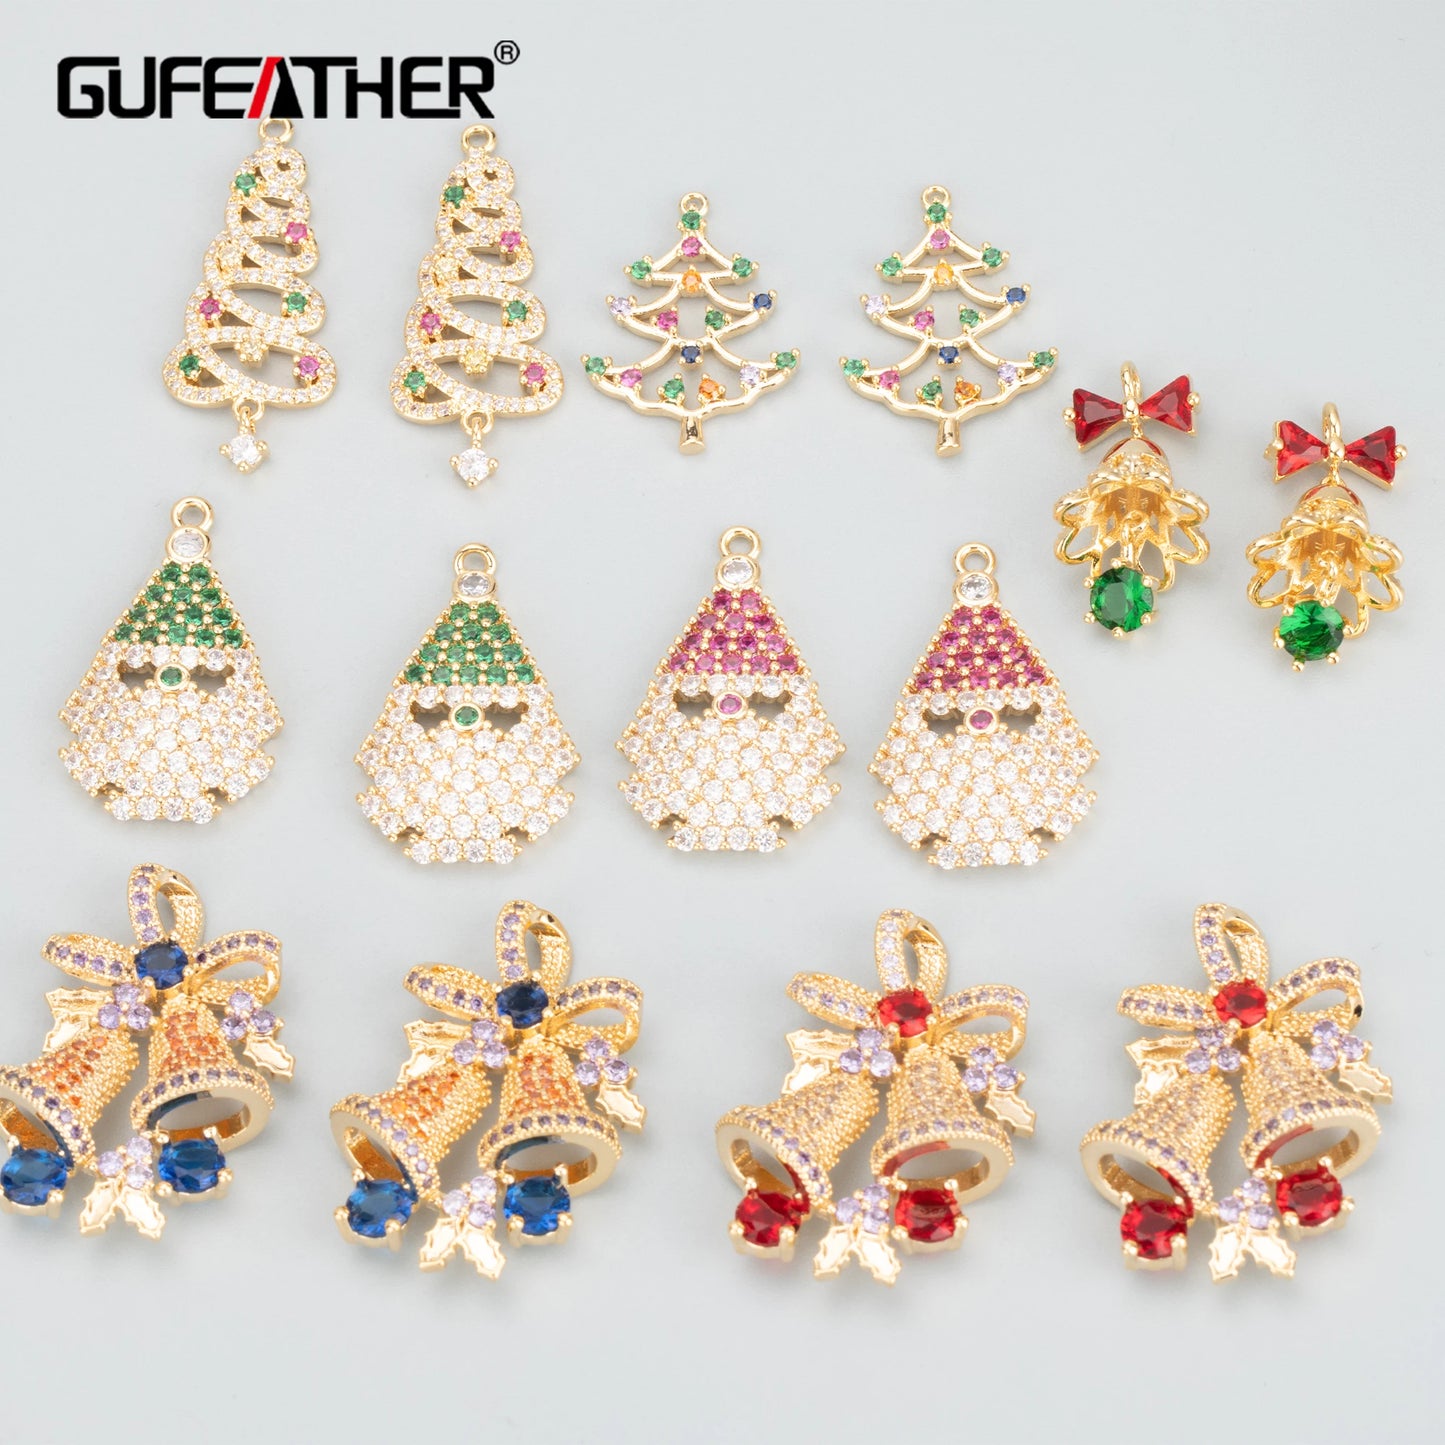 GUFEATHER MB95,jewelry accessories,christmas tree bell,18k gold plated,copper,zircons,jewelry making,christmas pendants,4pcs/lot